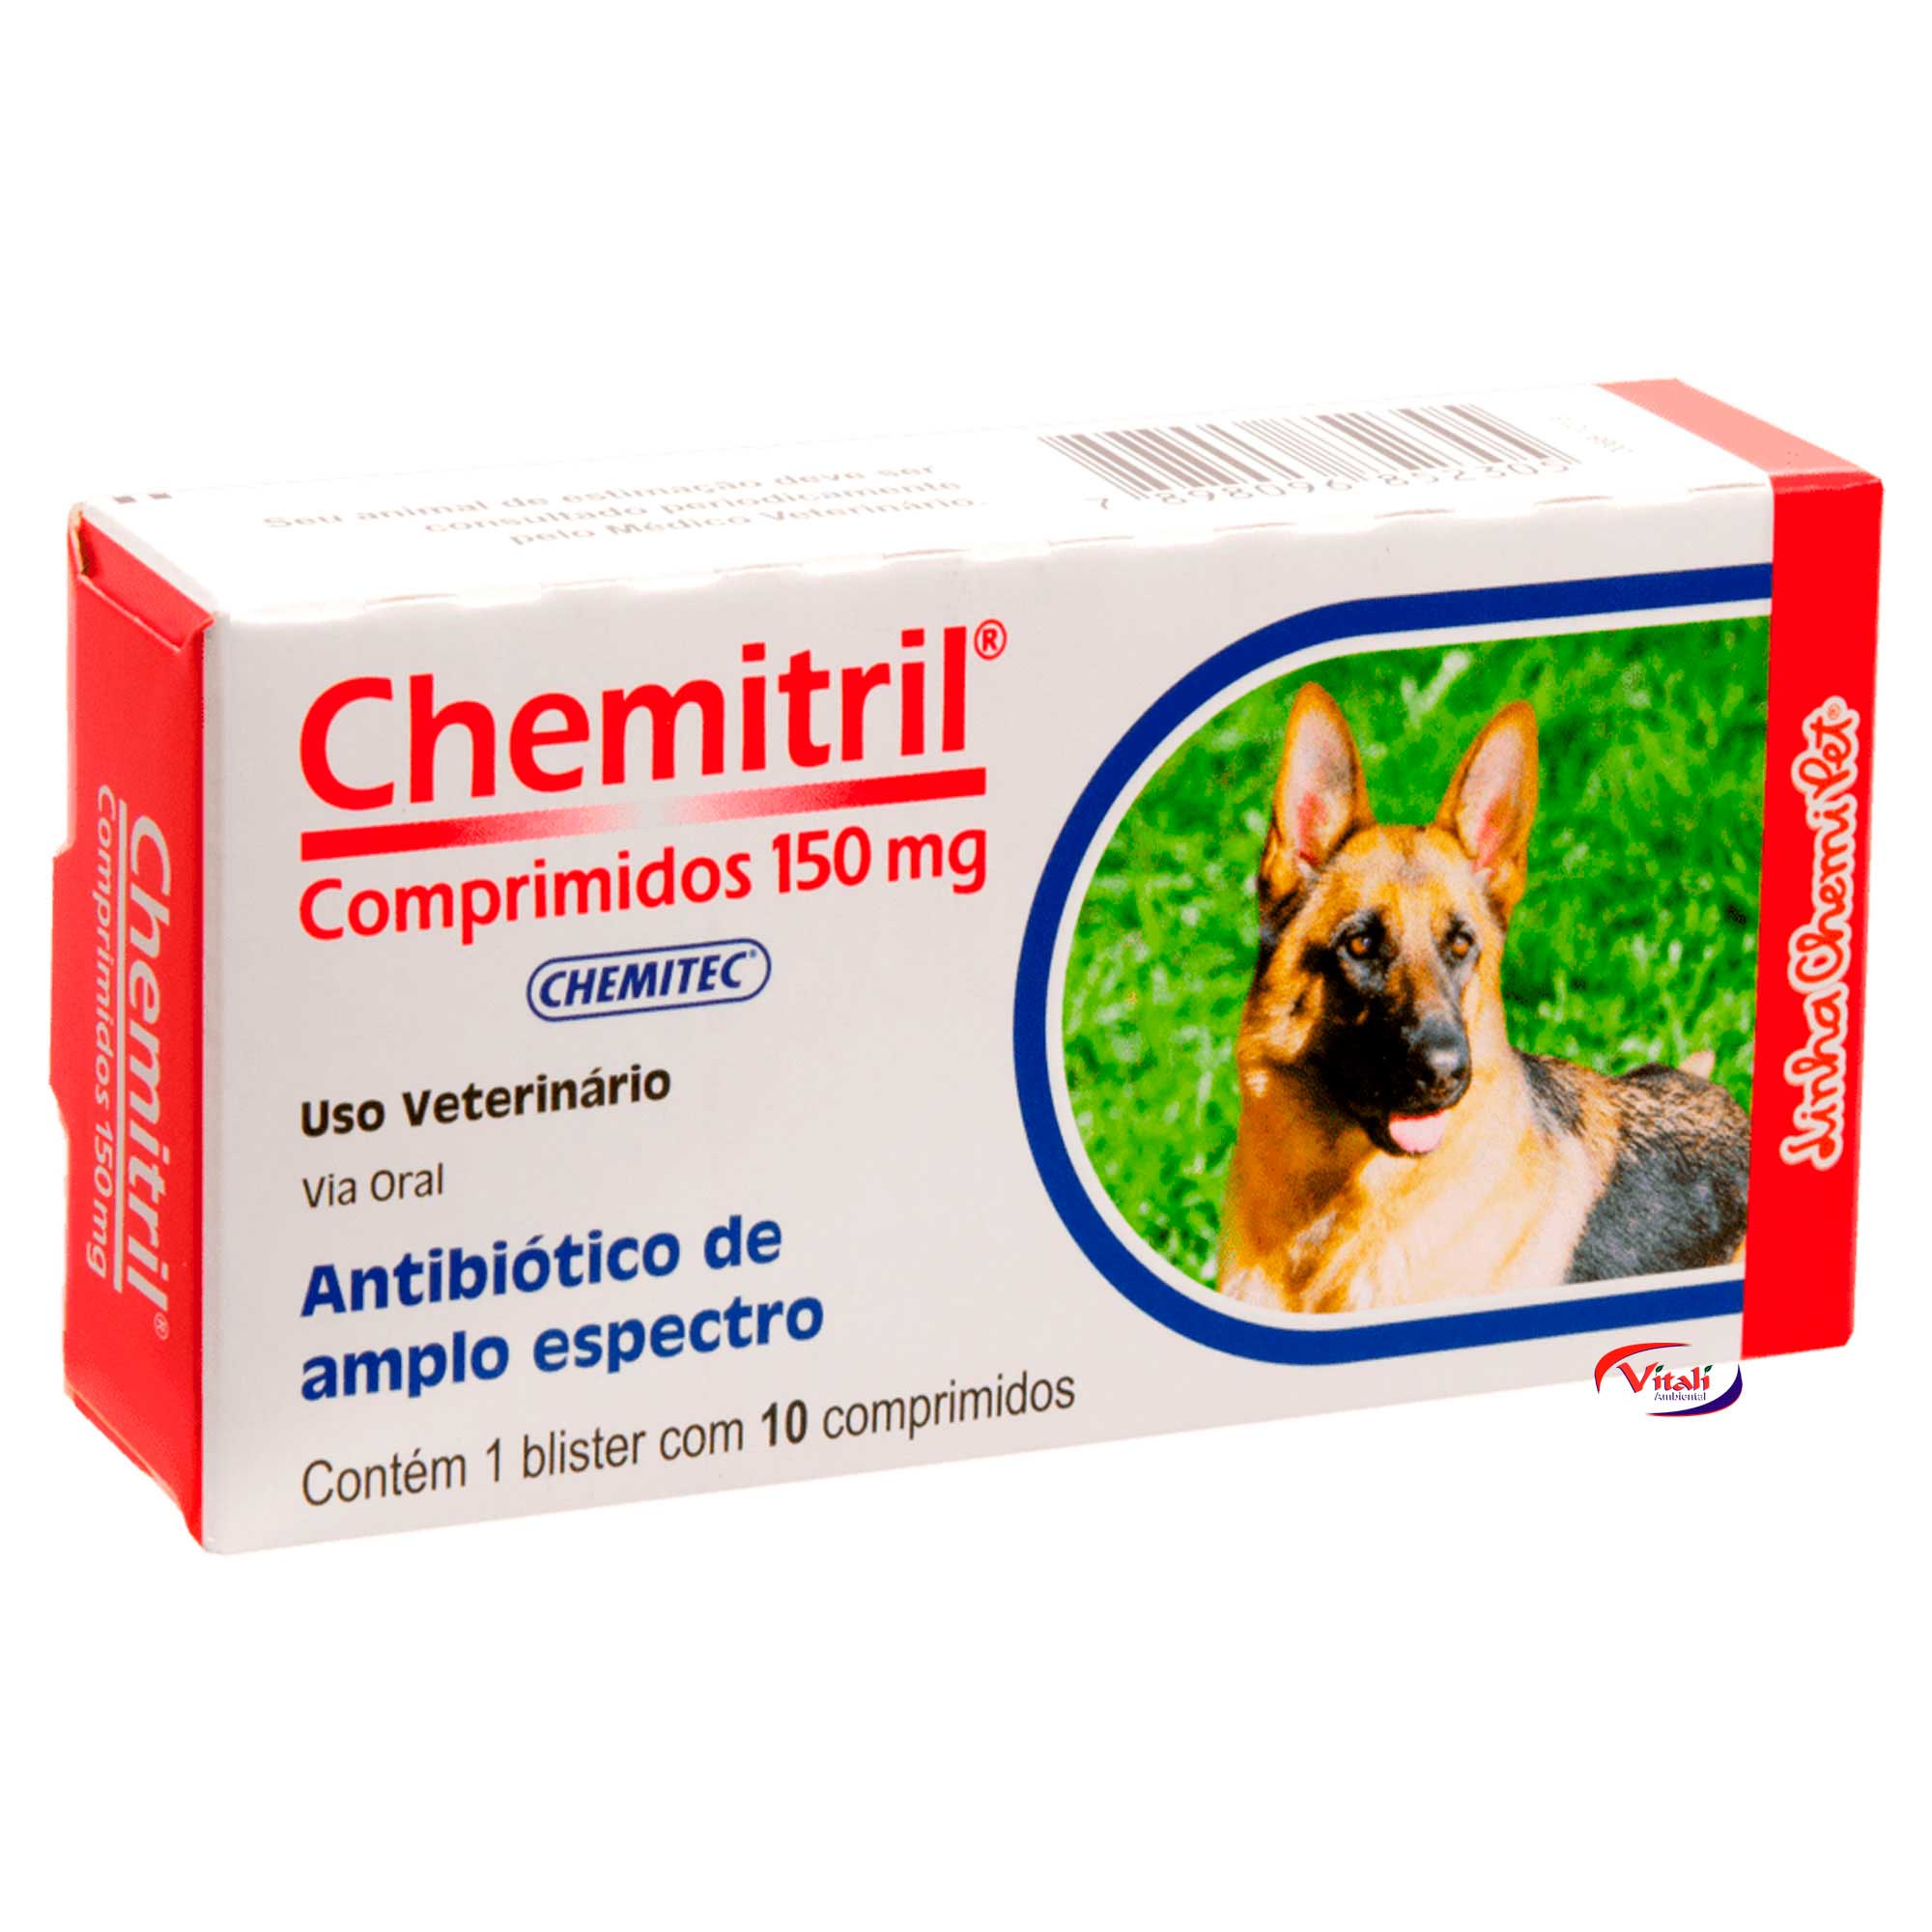 CHEMITRIL 150MG 10 COMPRIMIDOS